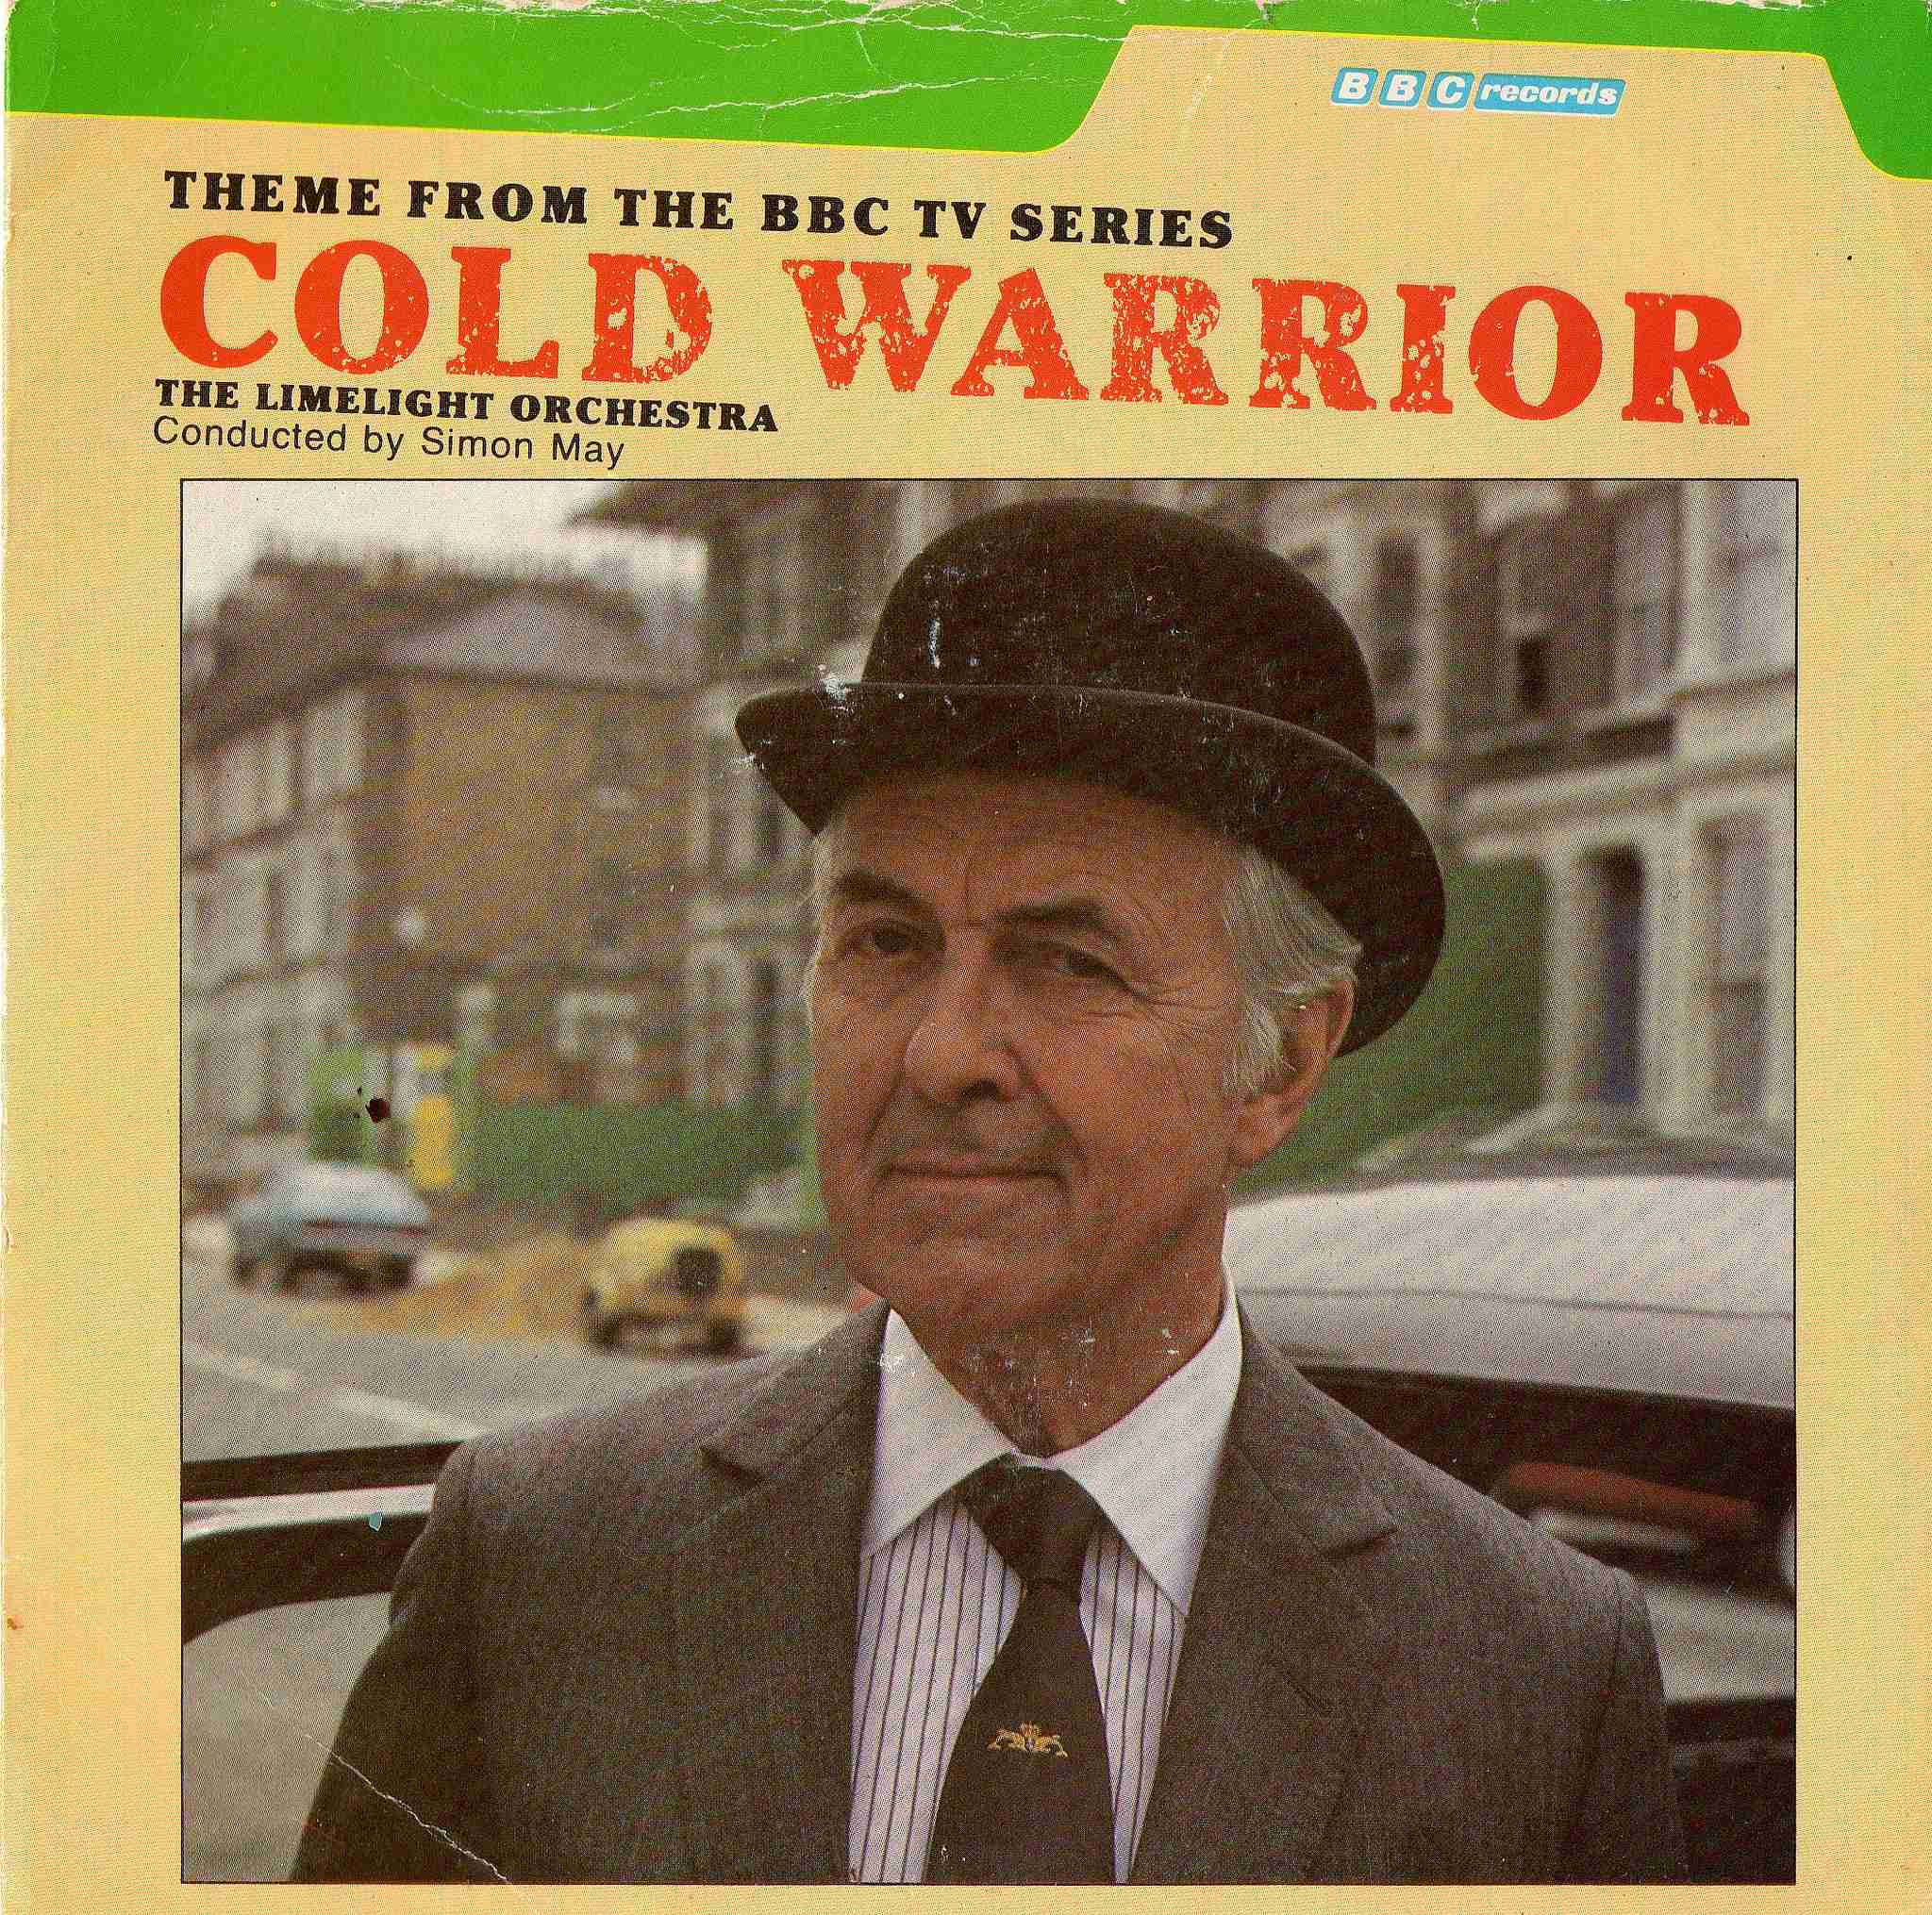 Picture of RESL 149 Cold warrior by artist Simon May / Leslie Osborne / The Limelight Orchestra from the BBC singles - Records and Tapes library